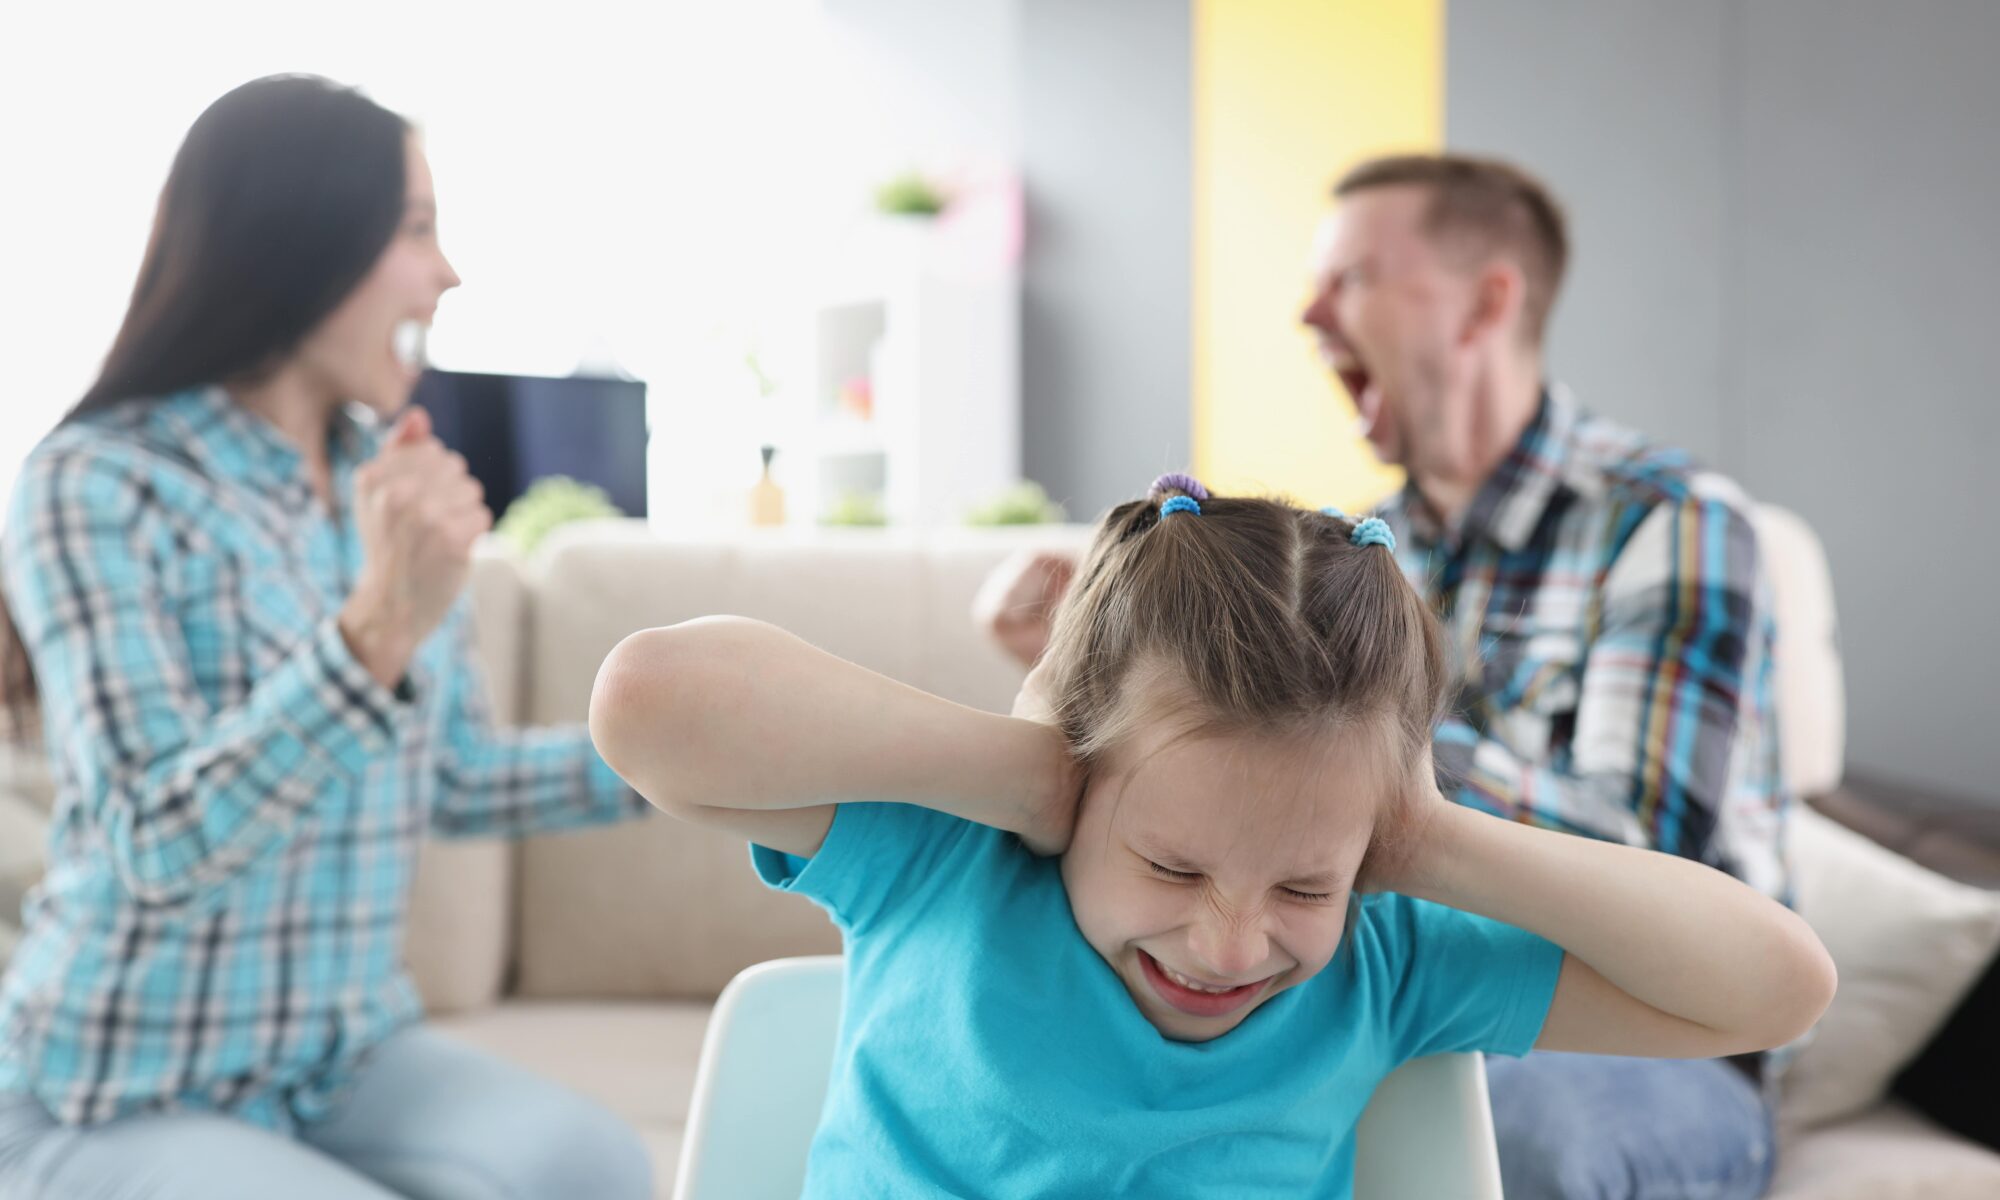 little-girl-closing-her-ears-against-background-swearing-parents-home-min